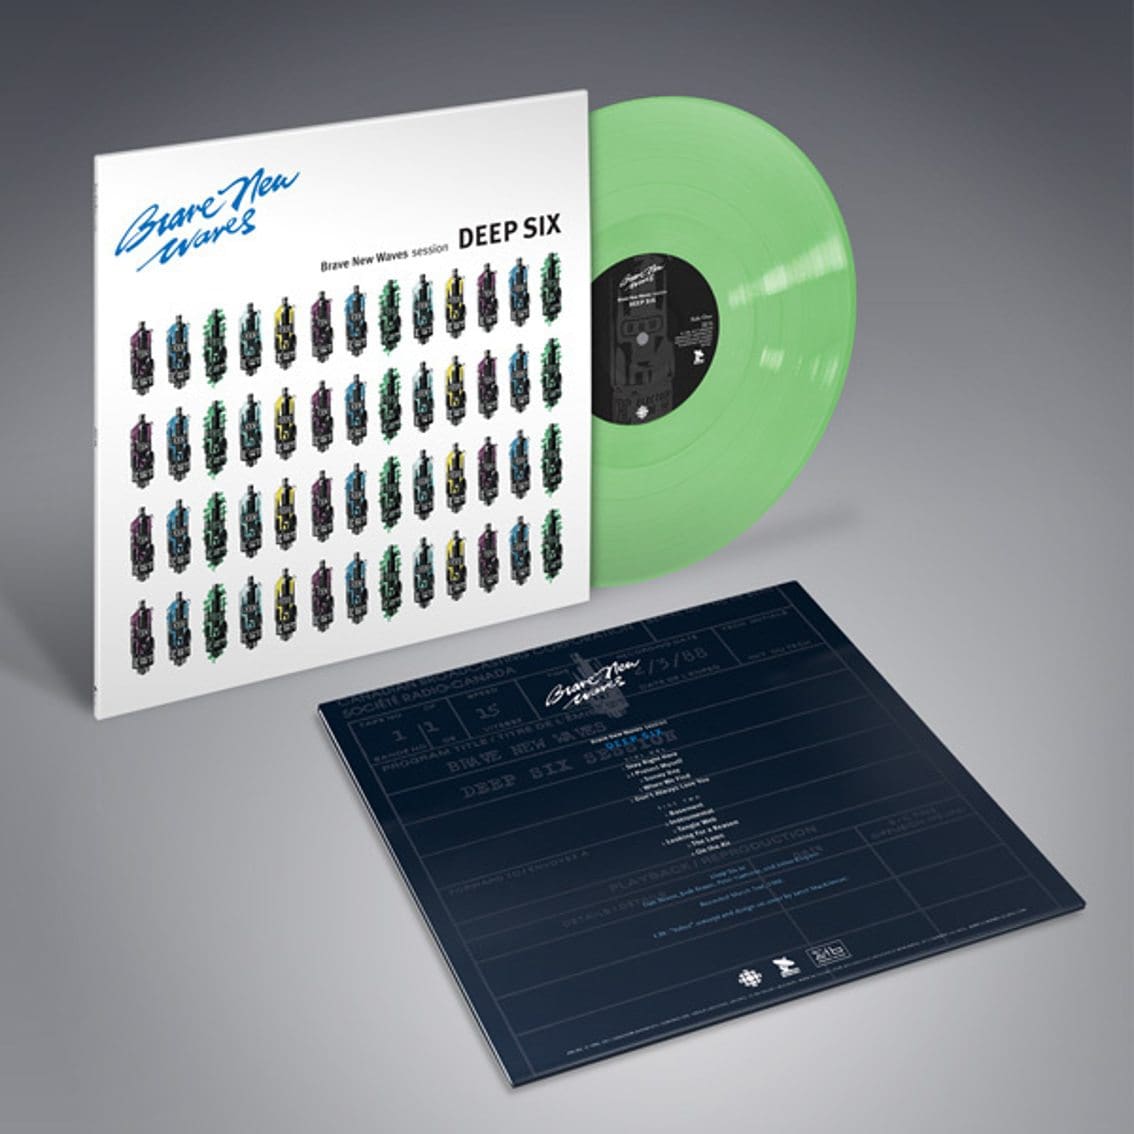 Deep Six gets long forgotten'Brave new waves session' material released on green vinyl